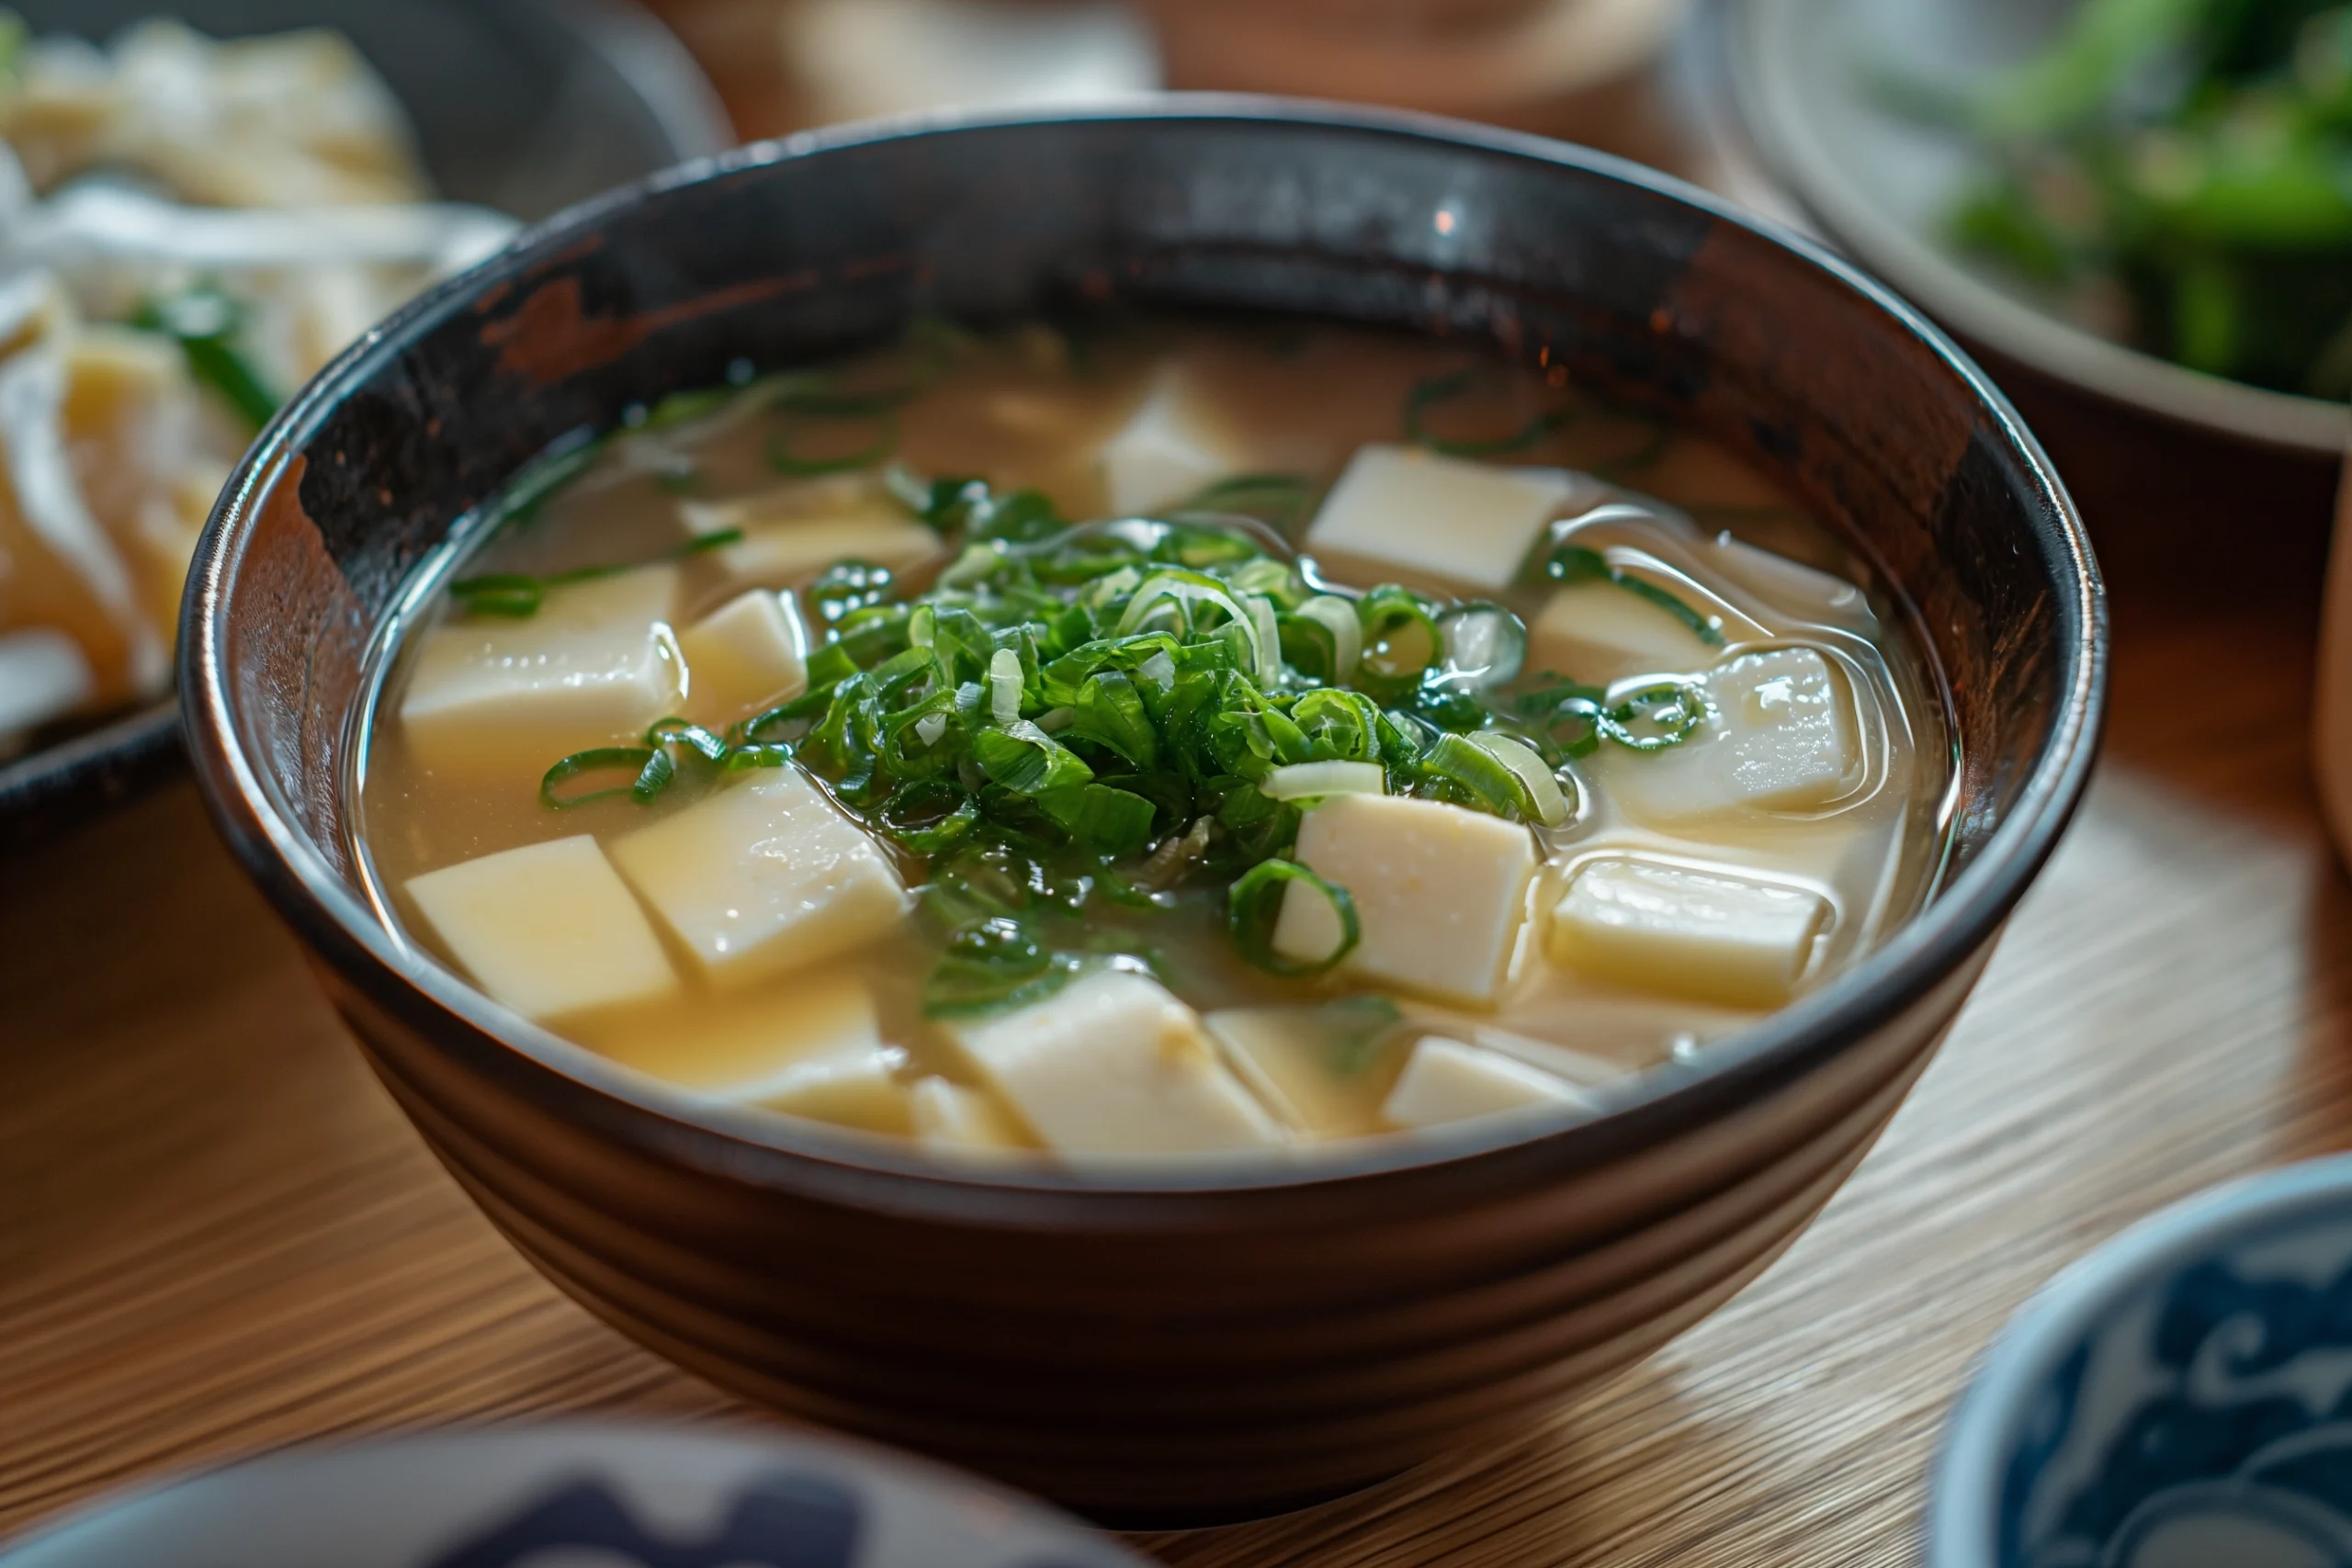 A comforting bowl of miso soup garnished with green onions, soft tofu cubes, and delicate wakame seaweed, served in a traditional black ceramic bowl with a wooden spoon on the side, set on a bamboo mat.